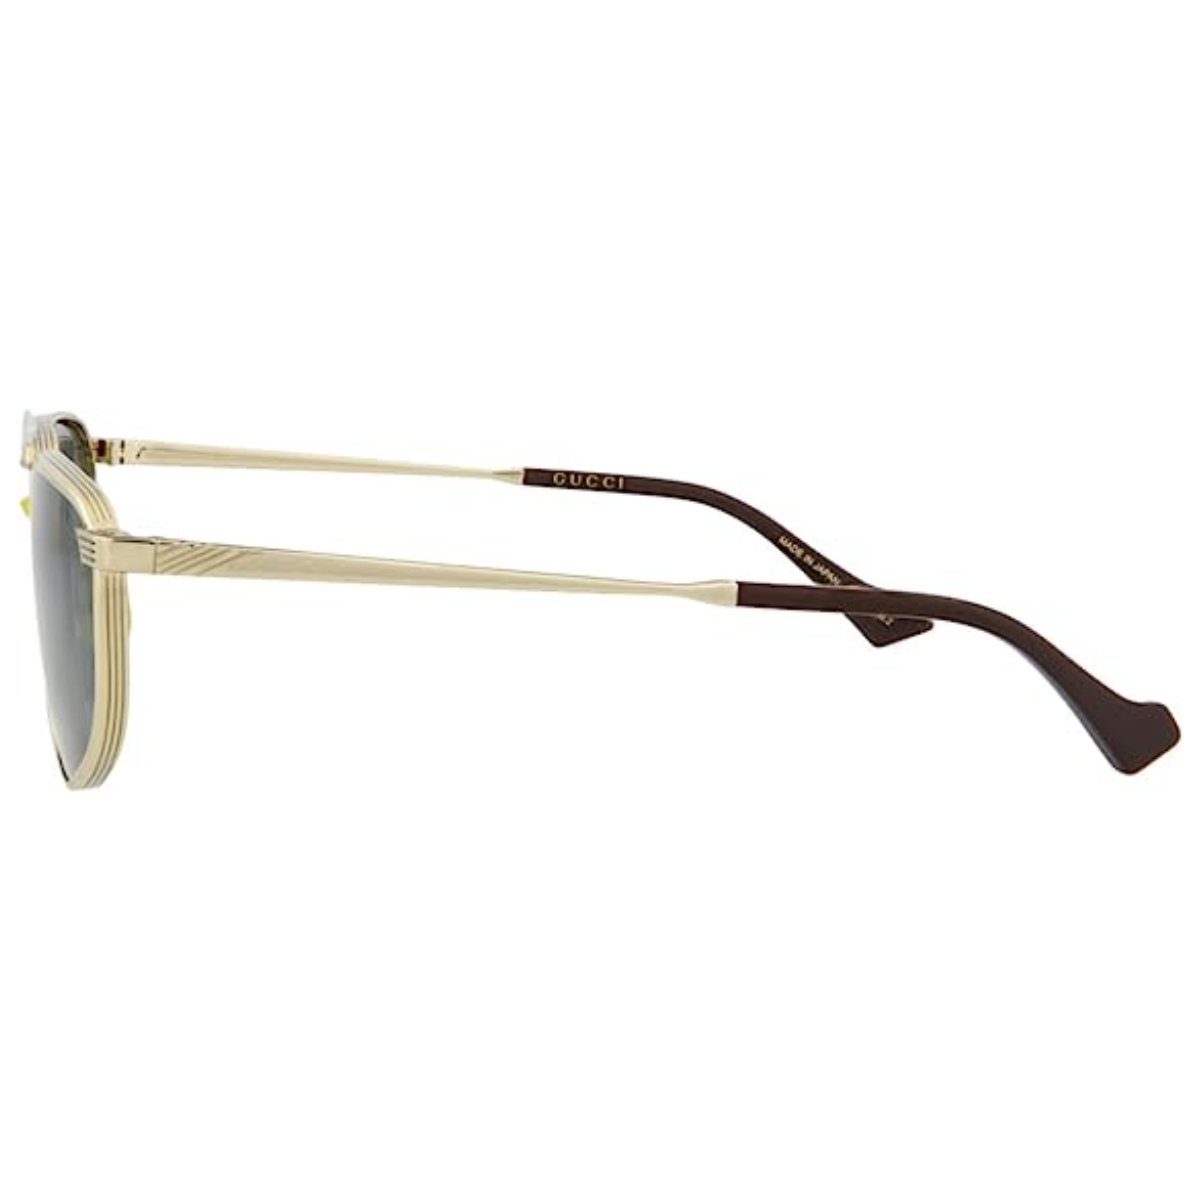 "Upgrade Your Look with Gucci 0841S Sunglasses for Men"